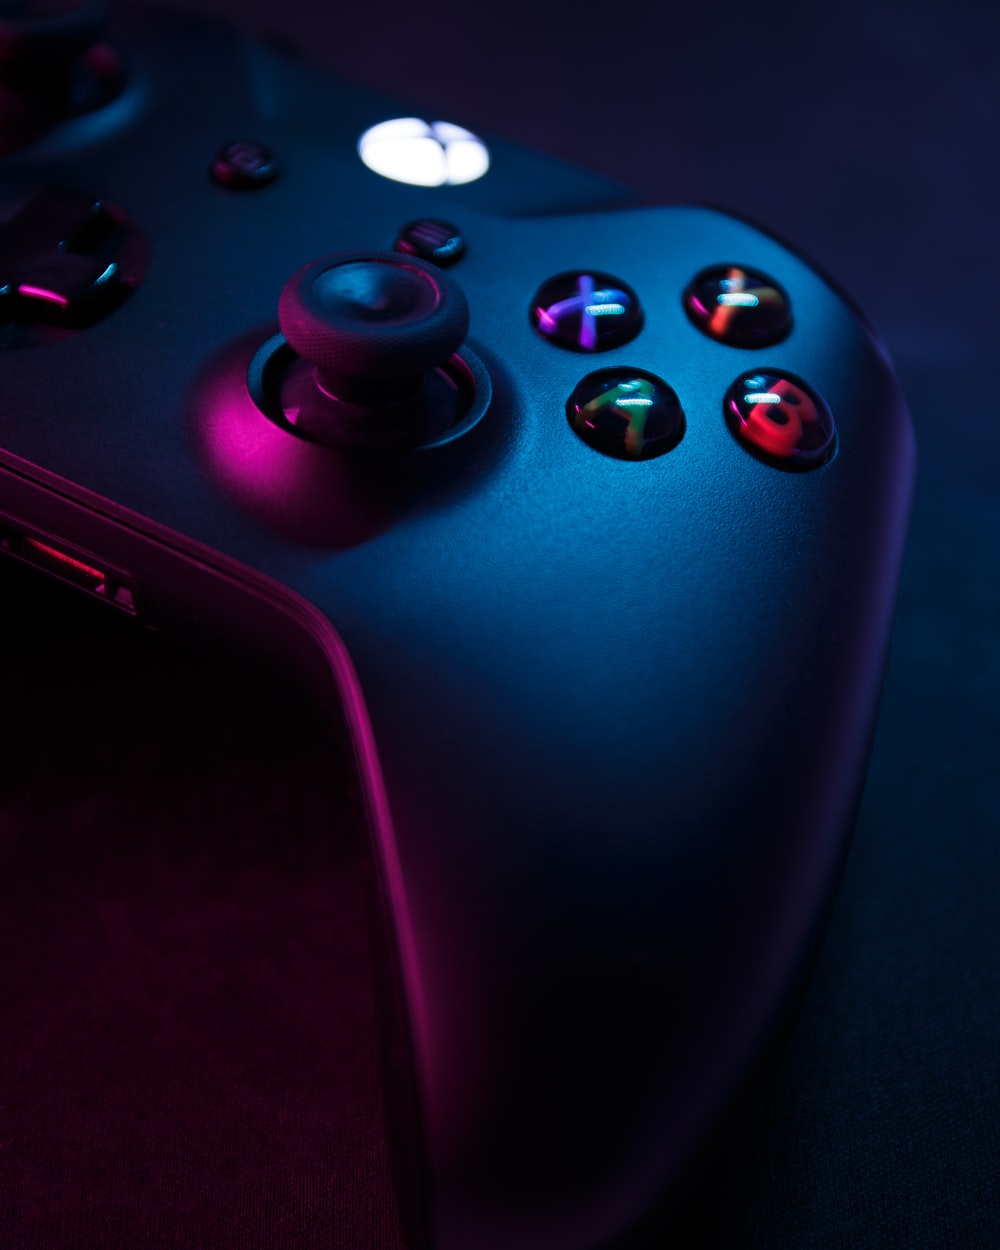 Joystick Picture. Download Free Image